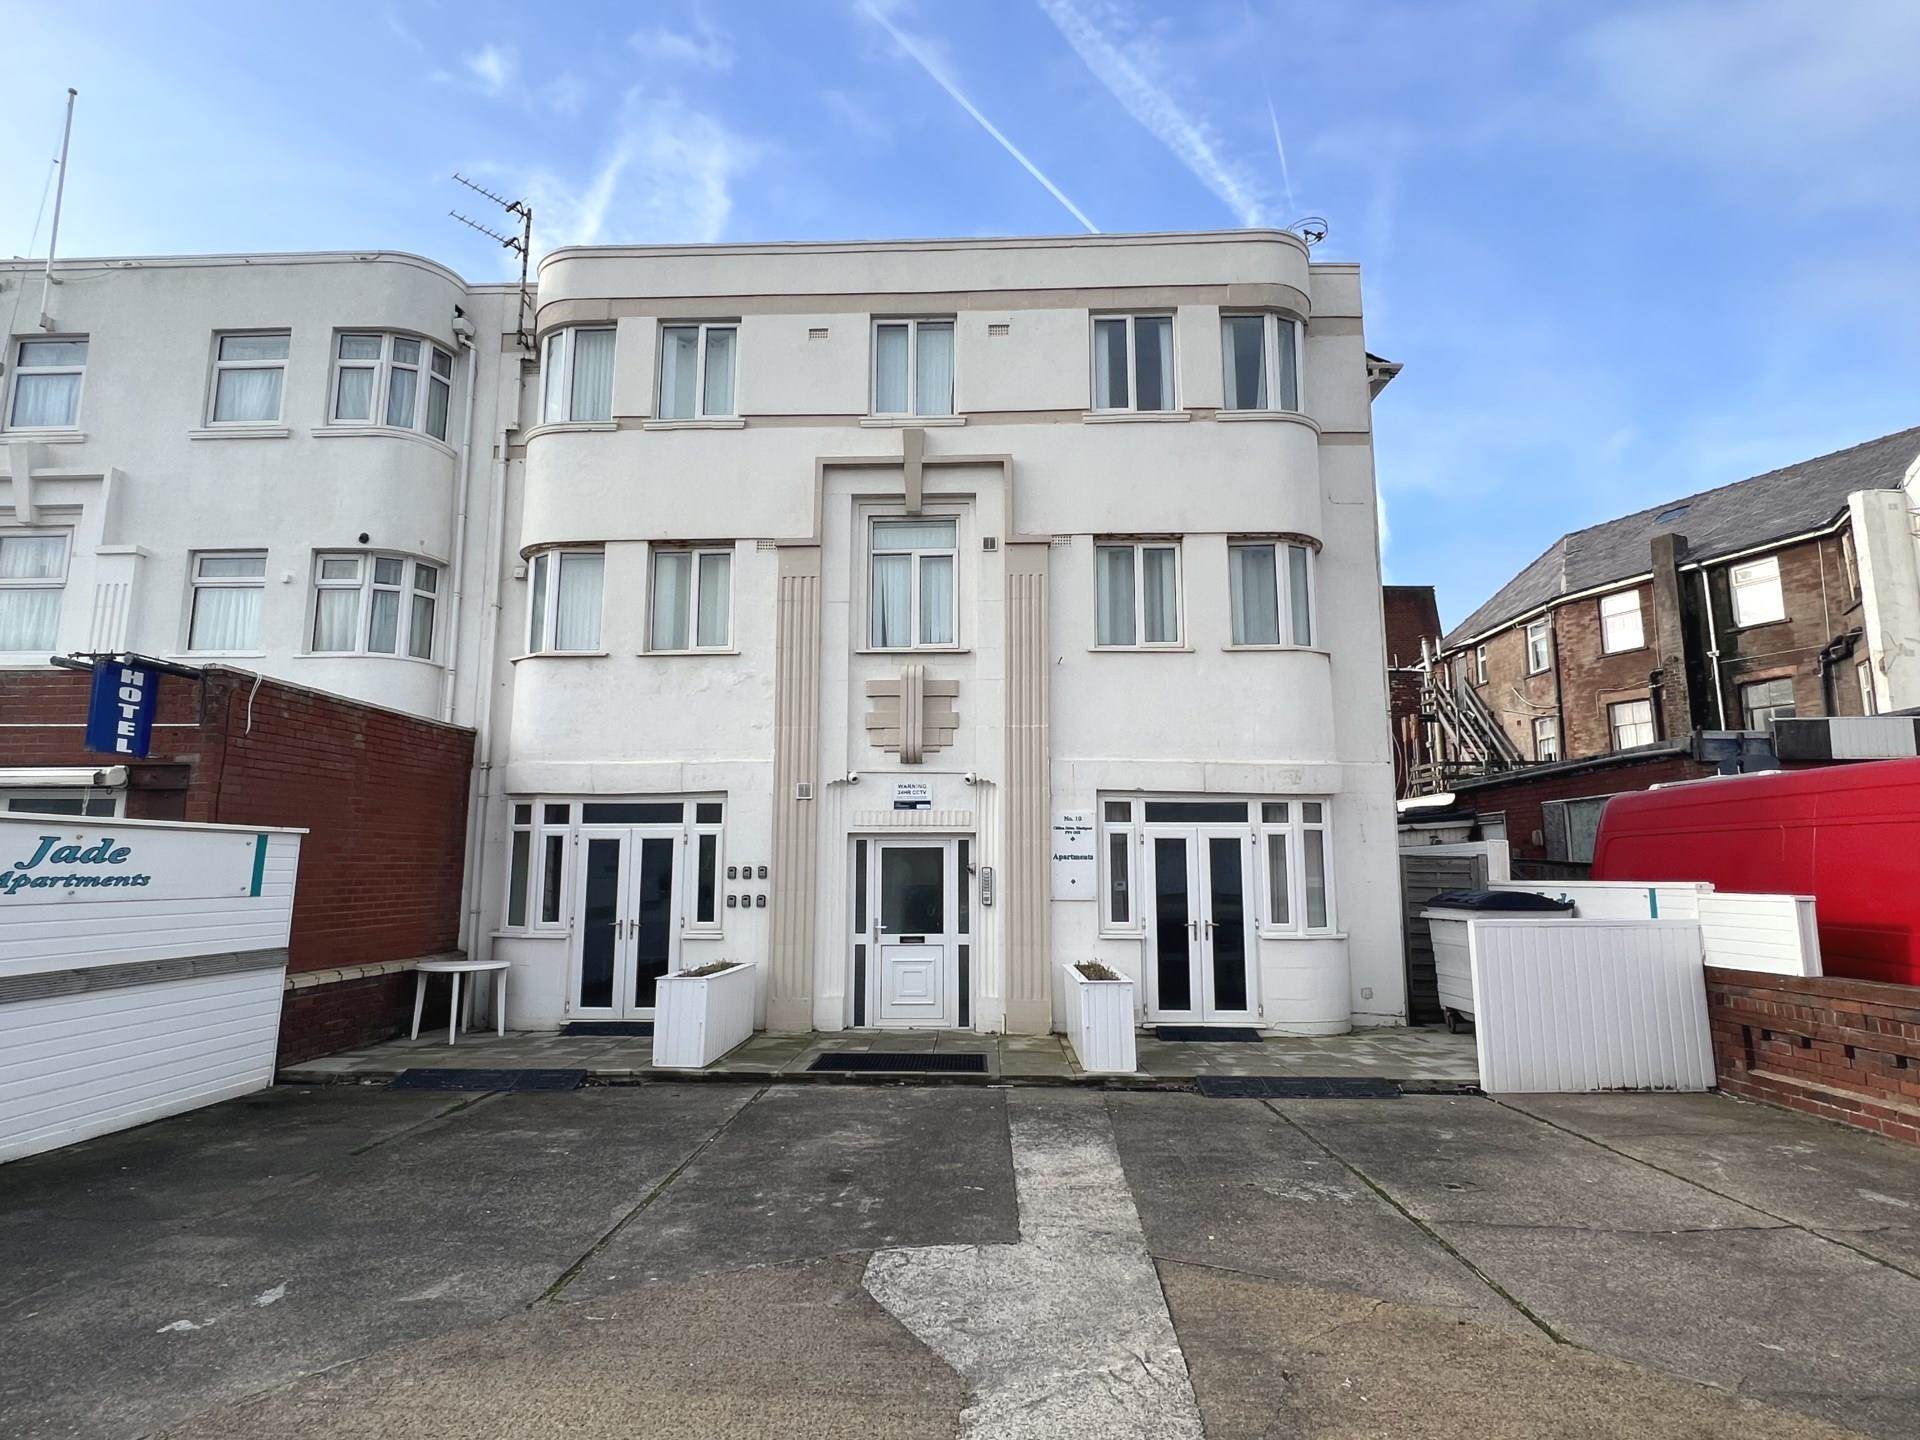 Clifton Drive, Blackpool, FY4 1NX, Image 1